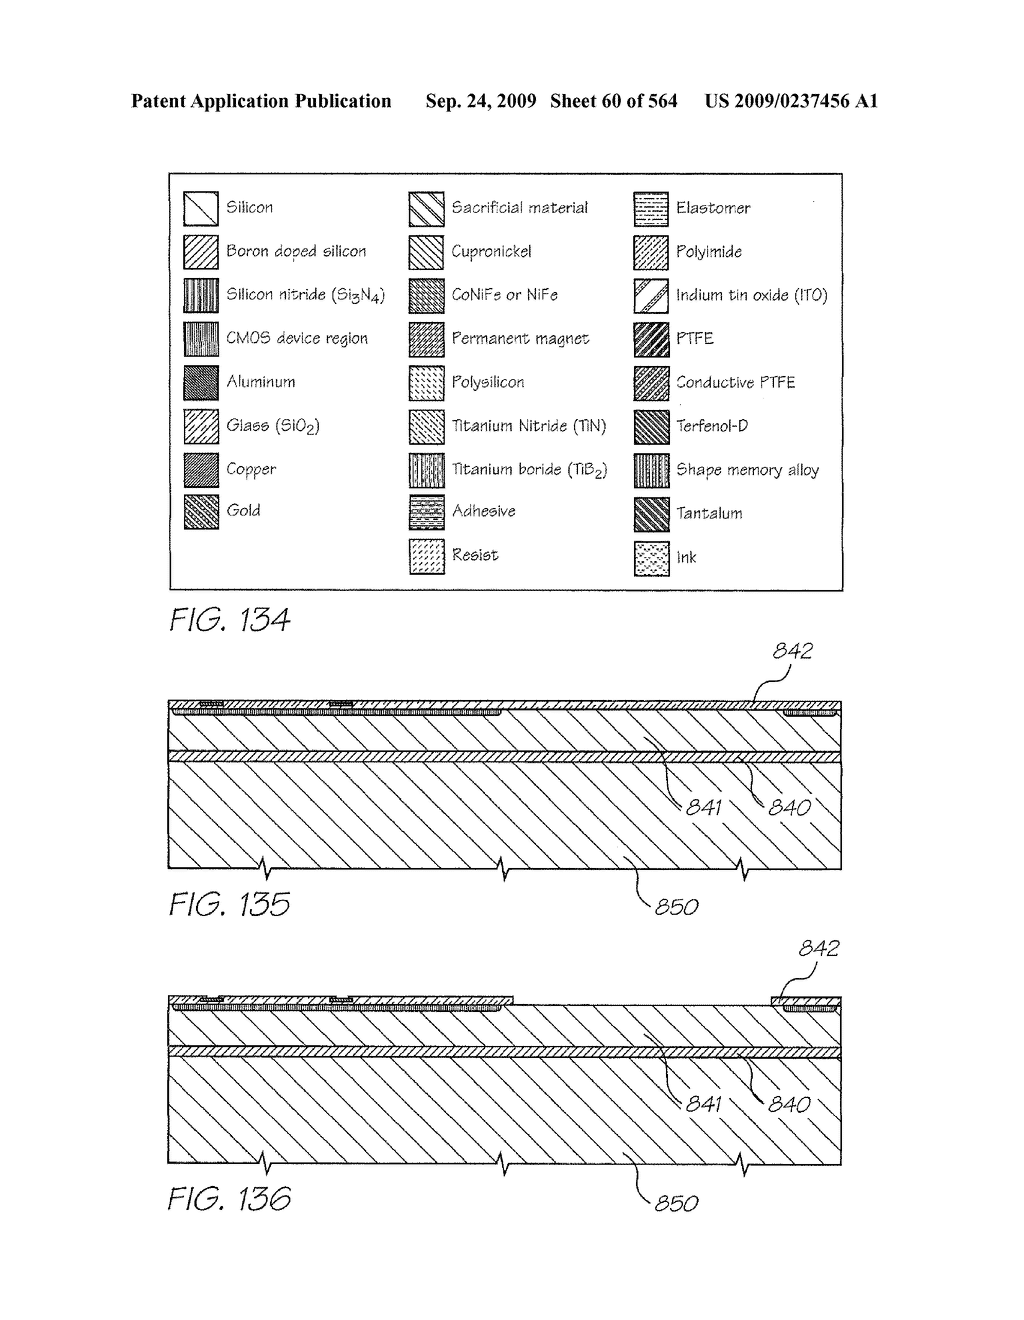 Inkjet Printhead With Paddle For Ejecting Ink From One Of Two Nozzles - diagram, schematic, and image 61